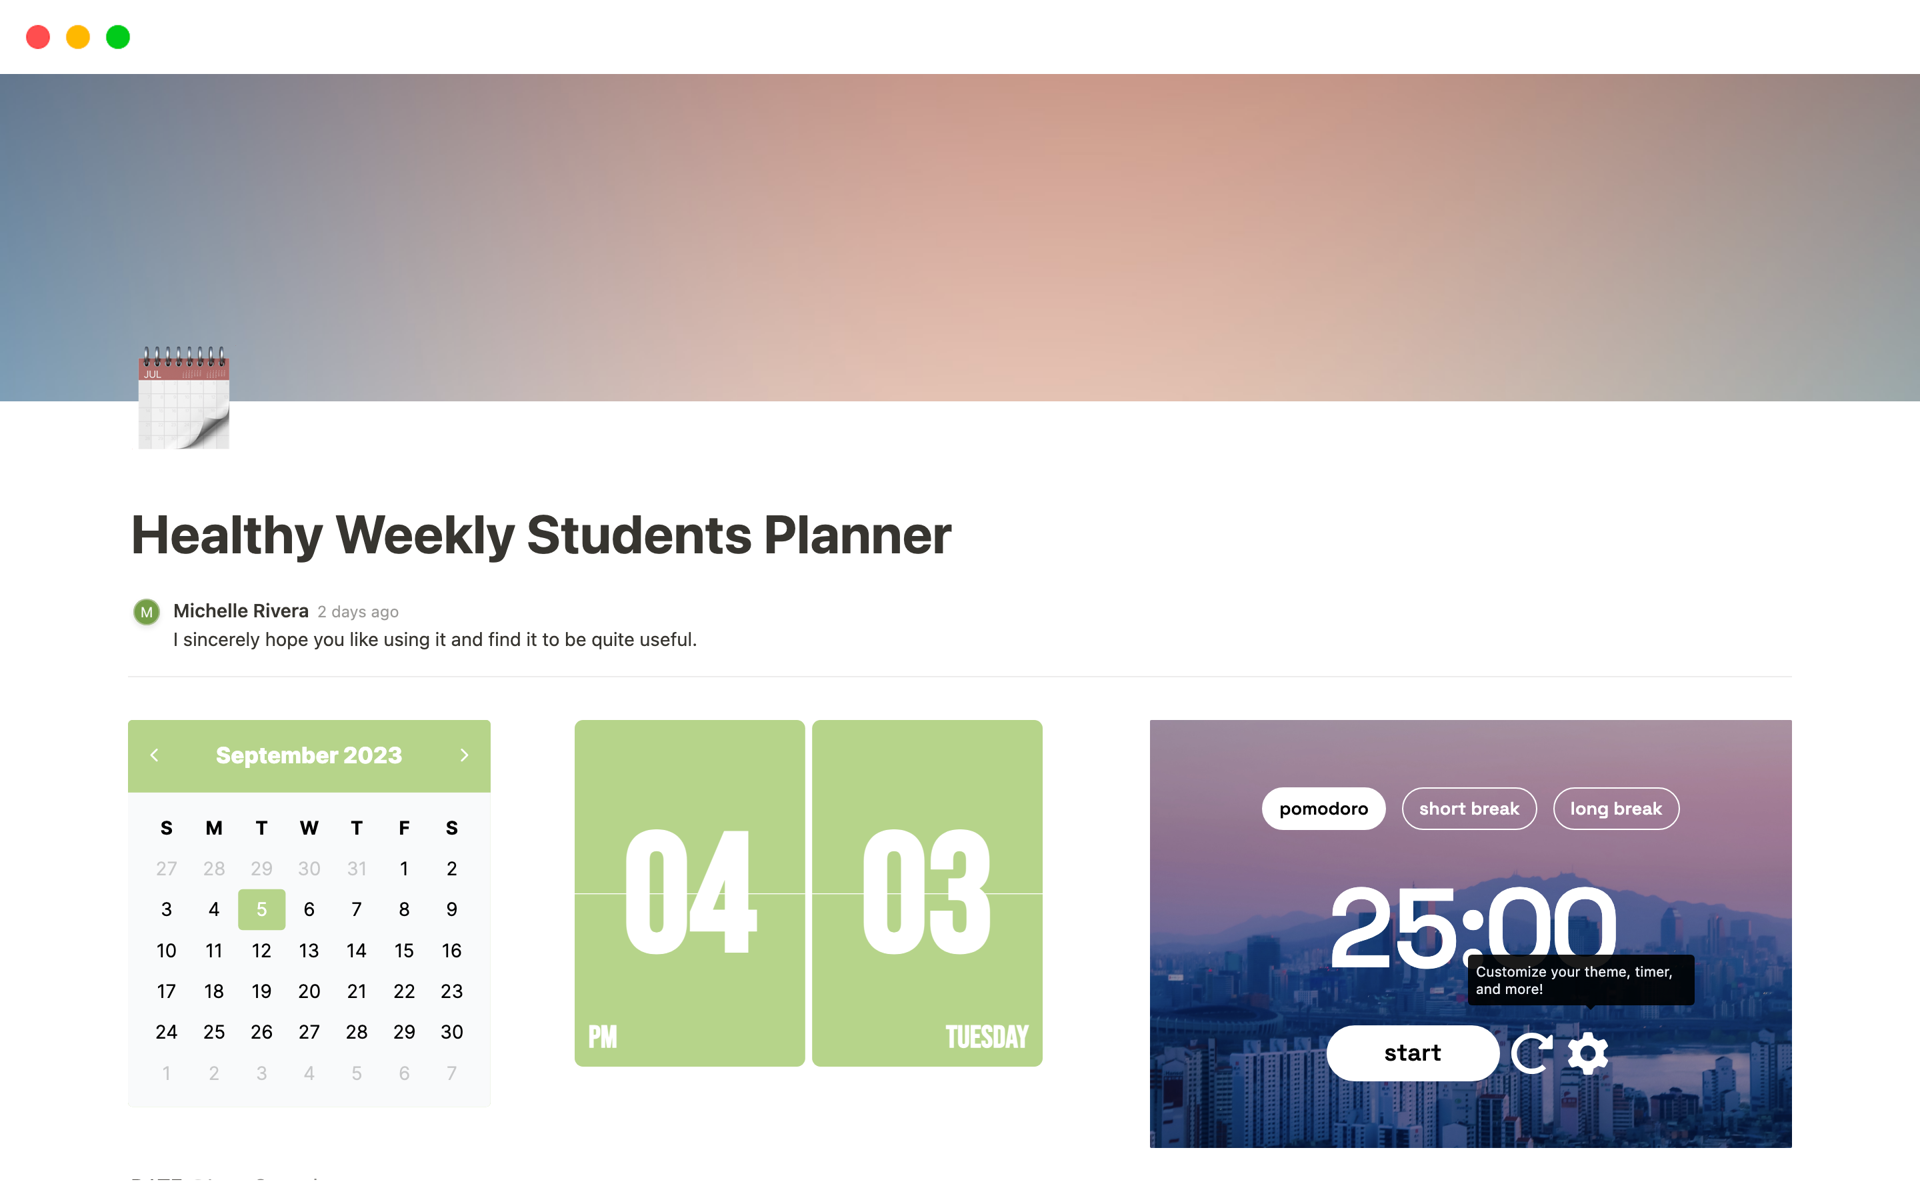 Anyone who has struggled in the past and wants to start living a healthier study life should use this planner.